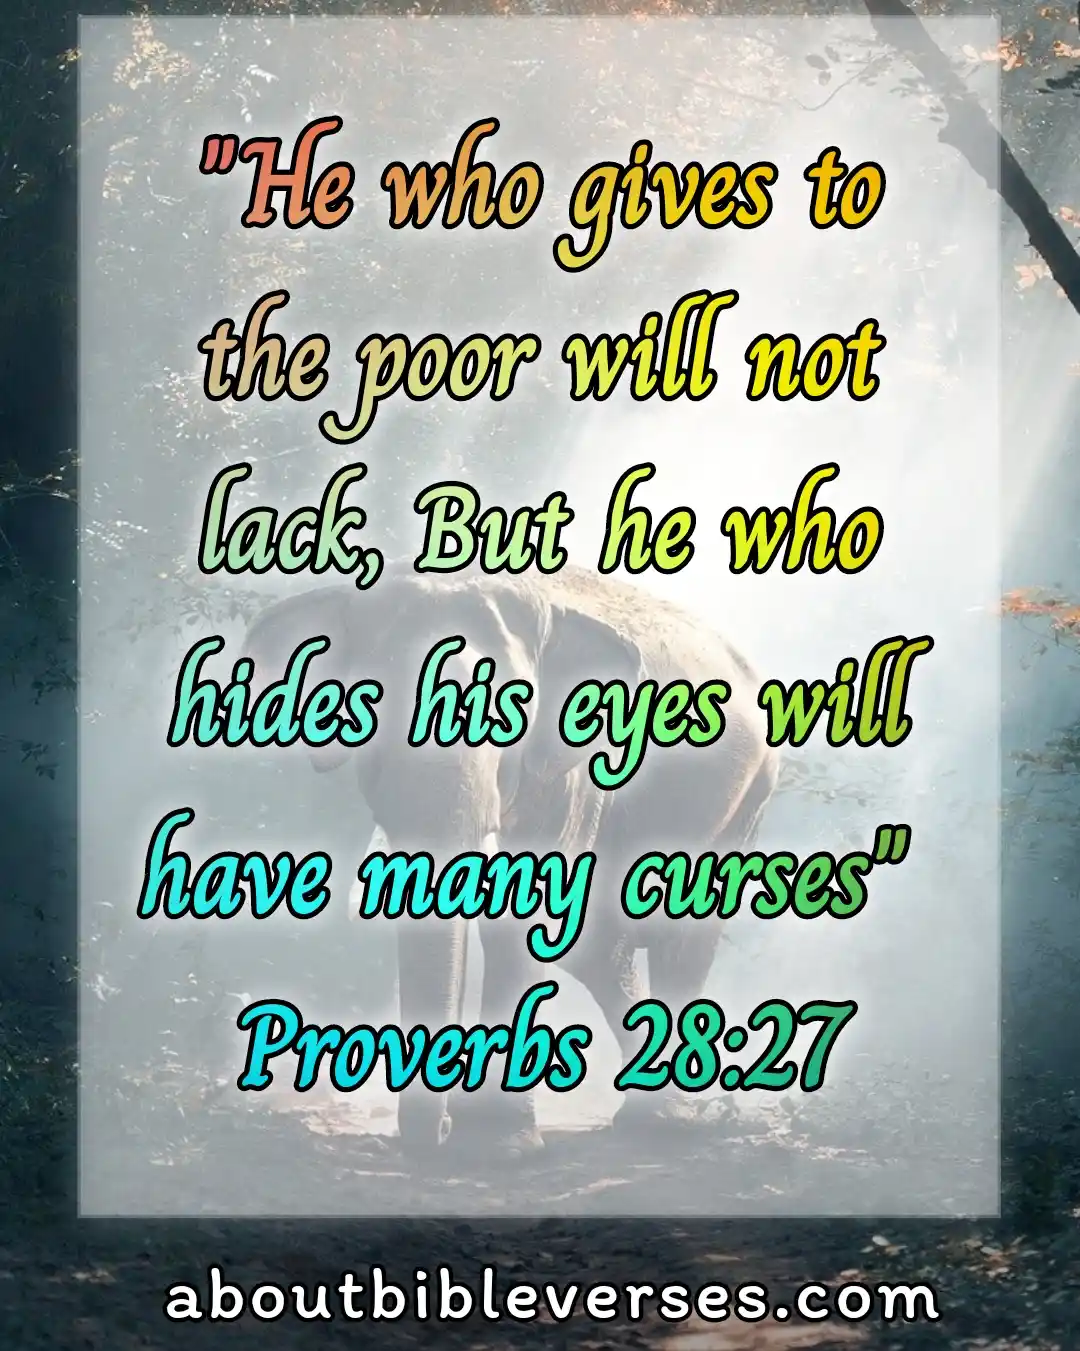 Bible Verses About Feeding The Hungry (Proverbs 28:27)